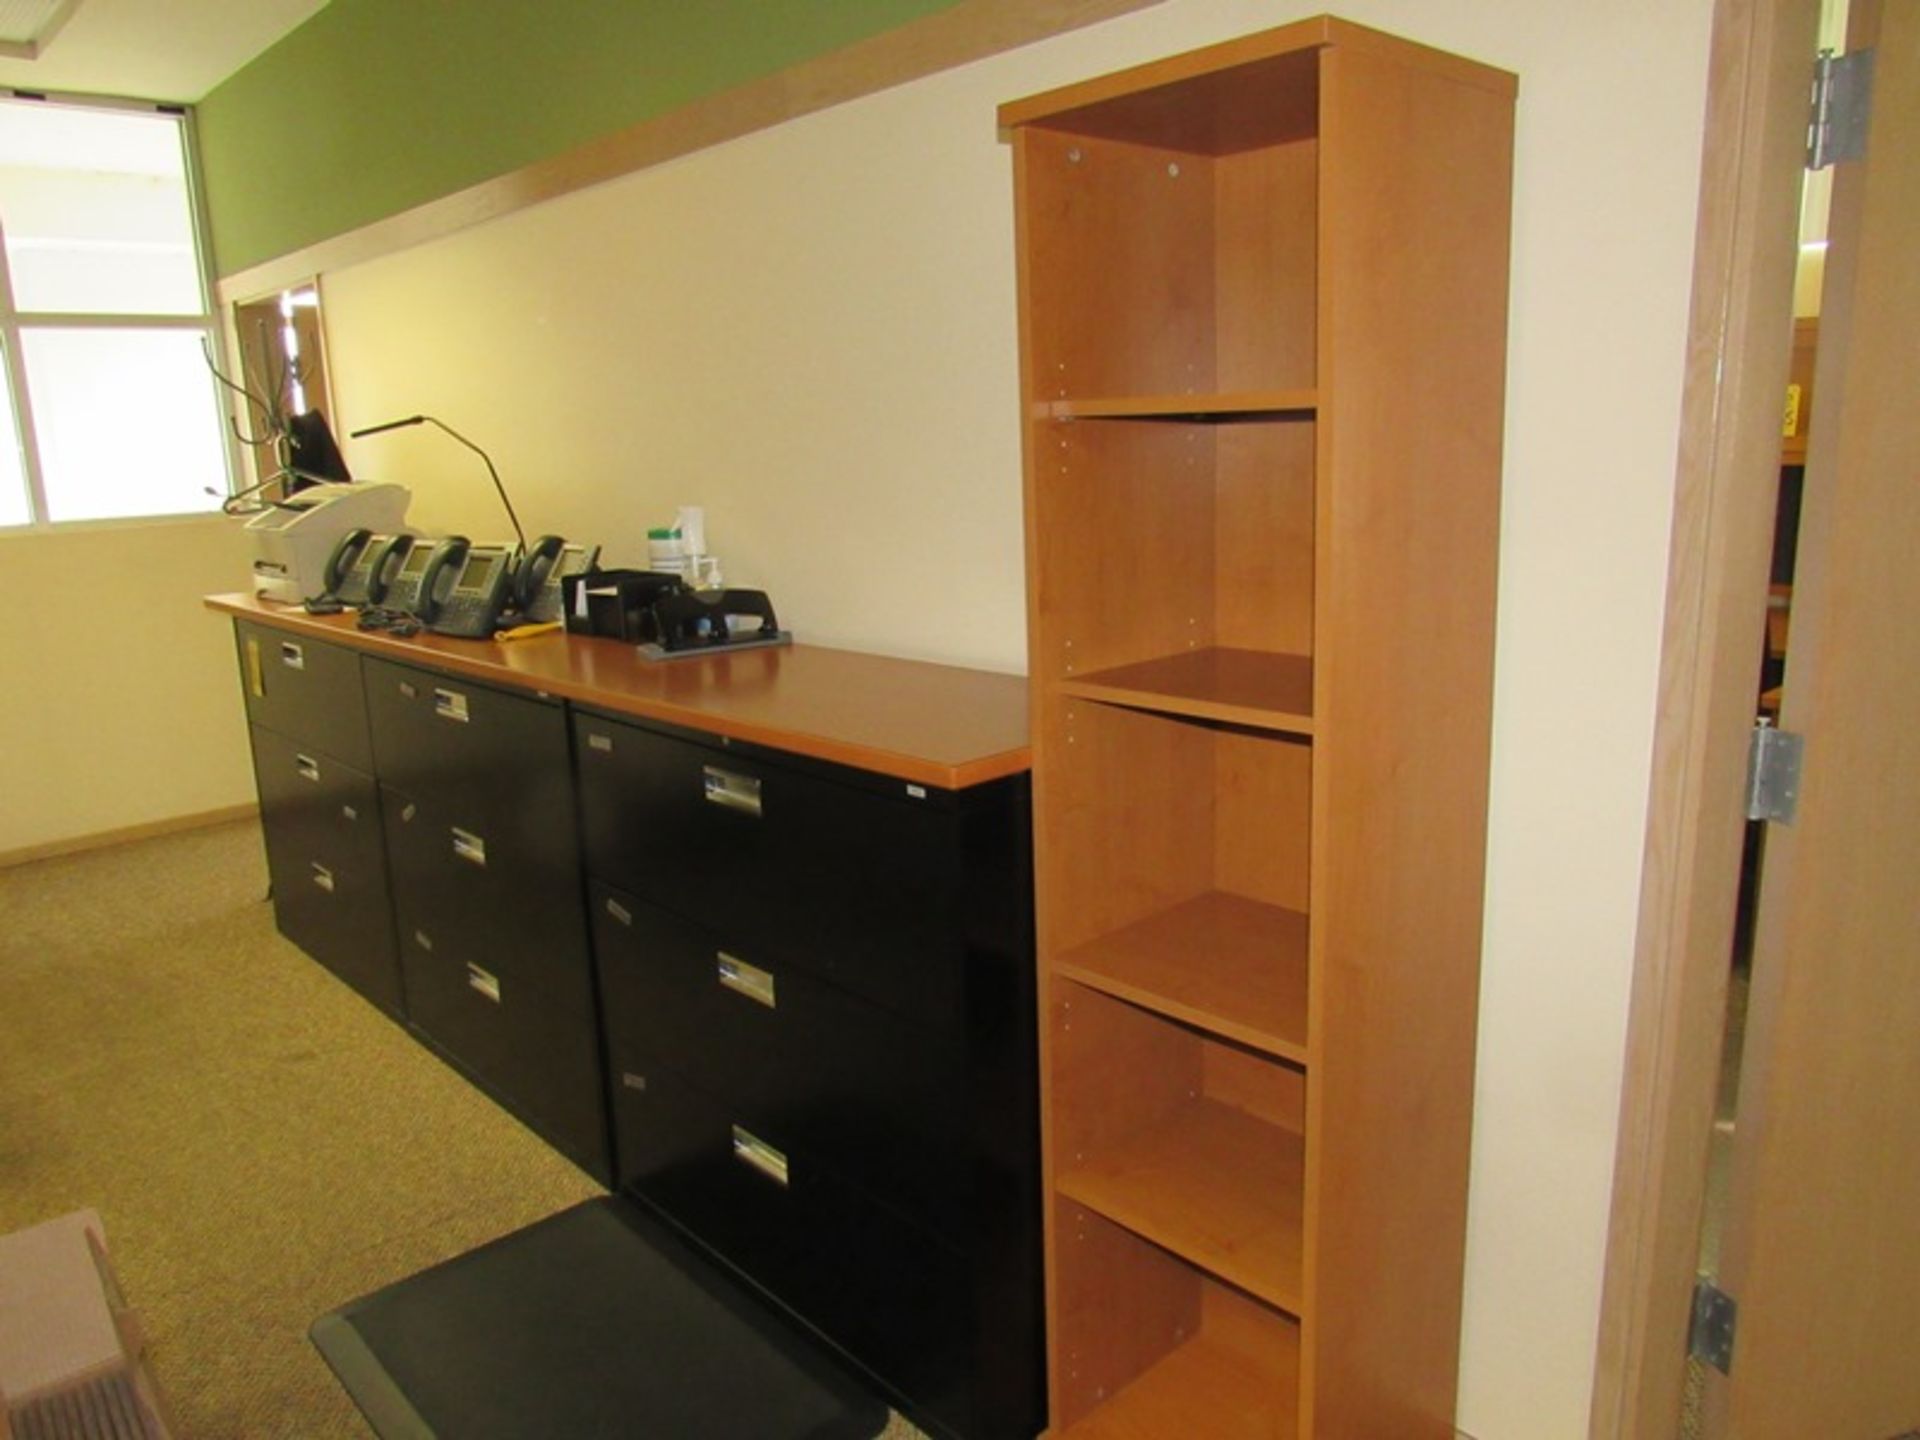 Lot Hallway, (4) 3-Drawer Lateral Files, Shelving Unit, File Cabinet (No Electronics or Tagged Items